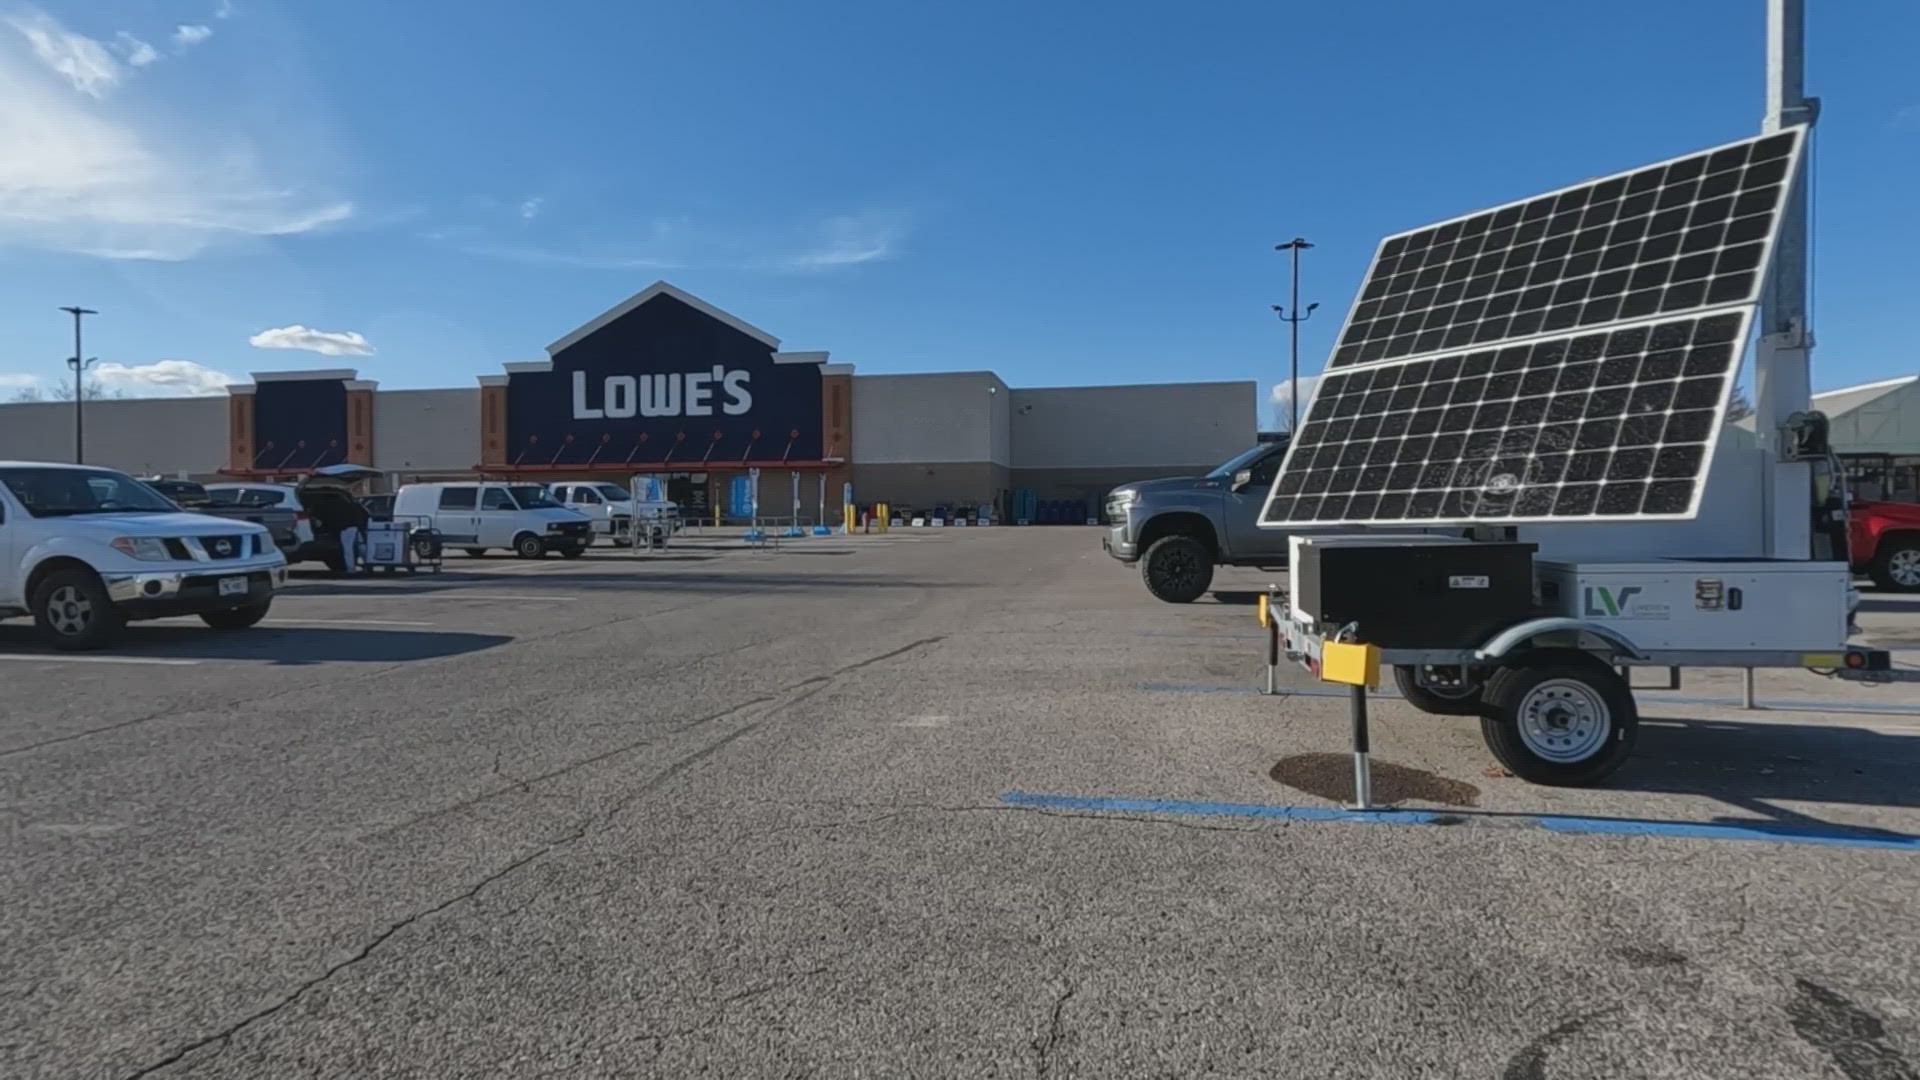 Lowe's Outlet is coming to Bridgeton. The store offers discounts on slightly-used home improvement items.